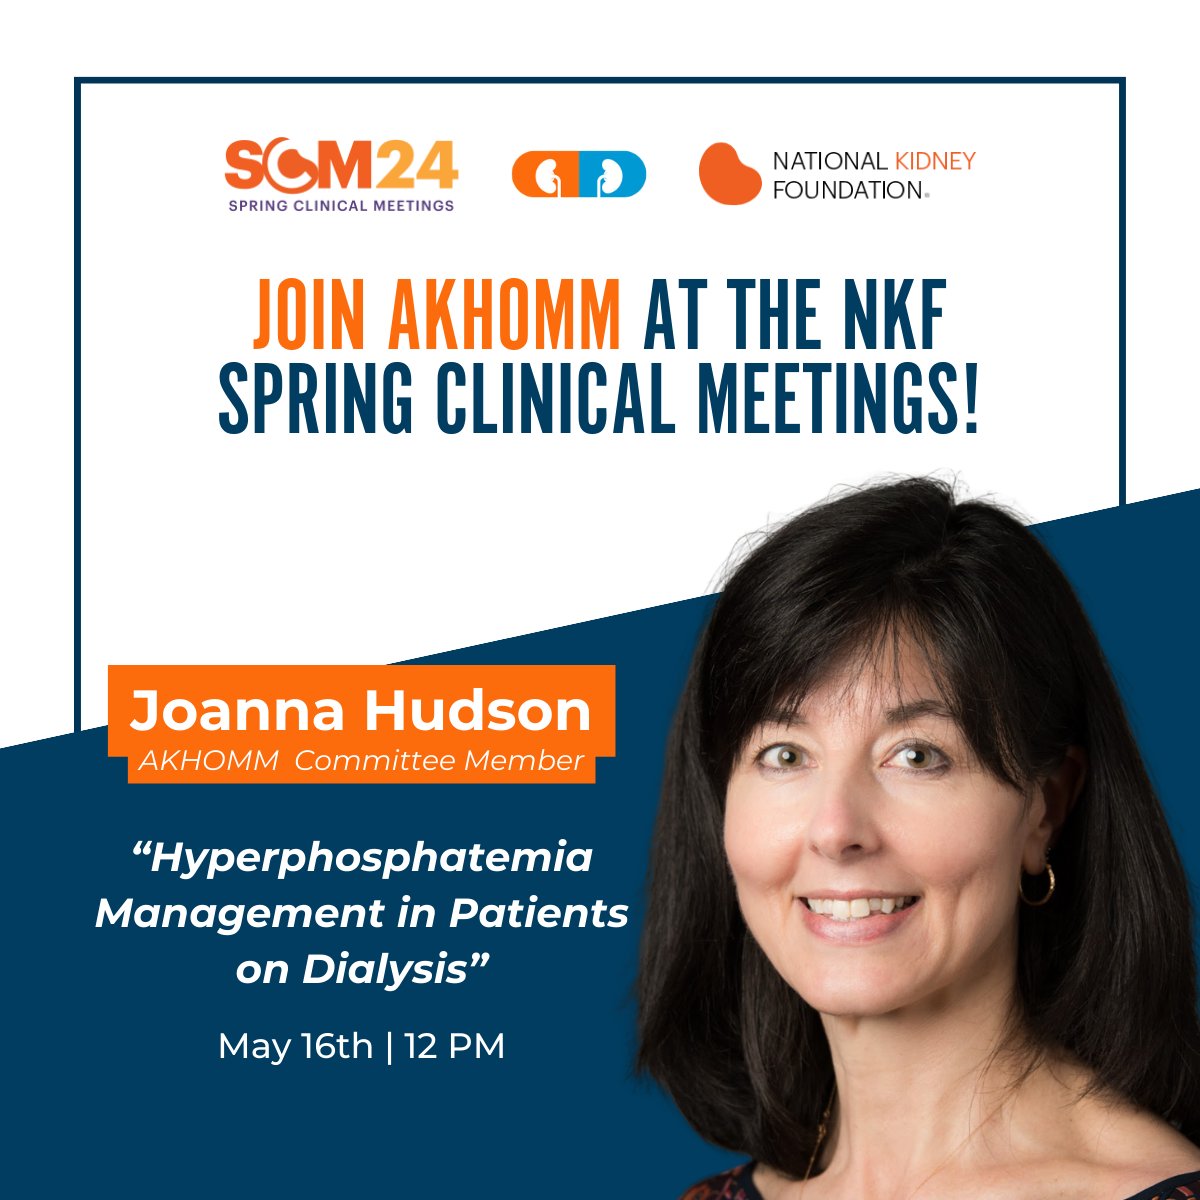 Join us at the NKF Spring Clinical Meetings on May 16 at 12 PM for a presentation by AKHOMM committee member, Joanna Hudson, on Hyperphosphatemia Management in Patients on Dialysis. #NKFSpringMeetings #MedTwitter #NephTwitter